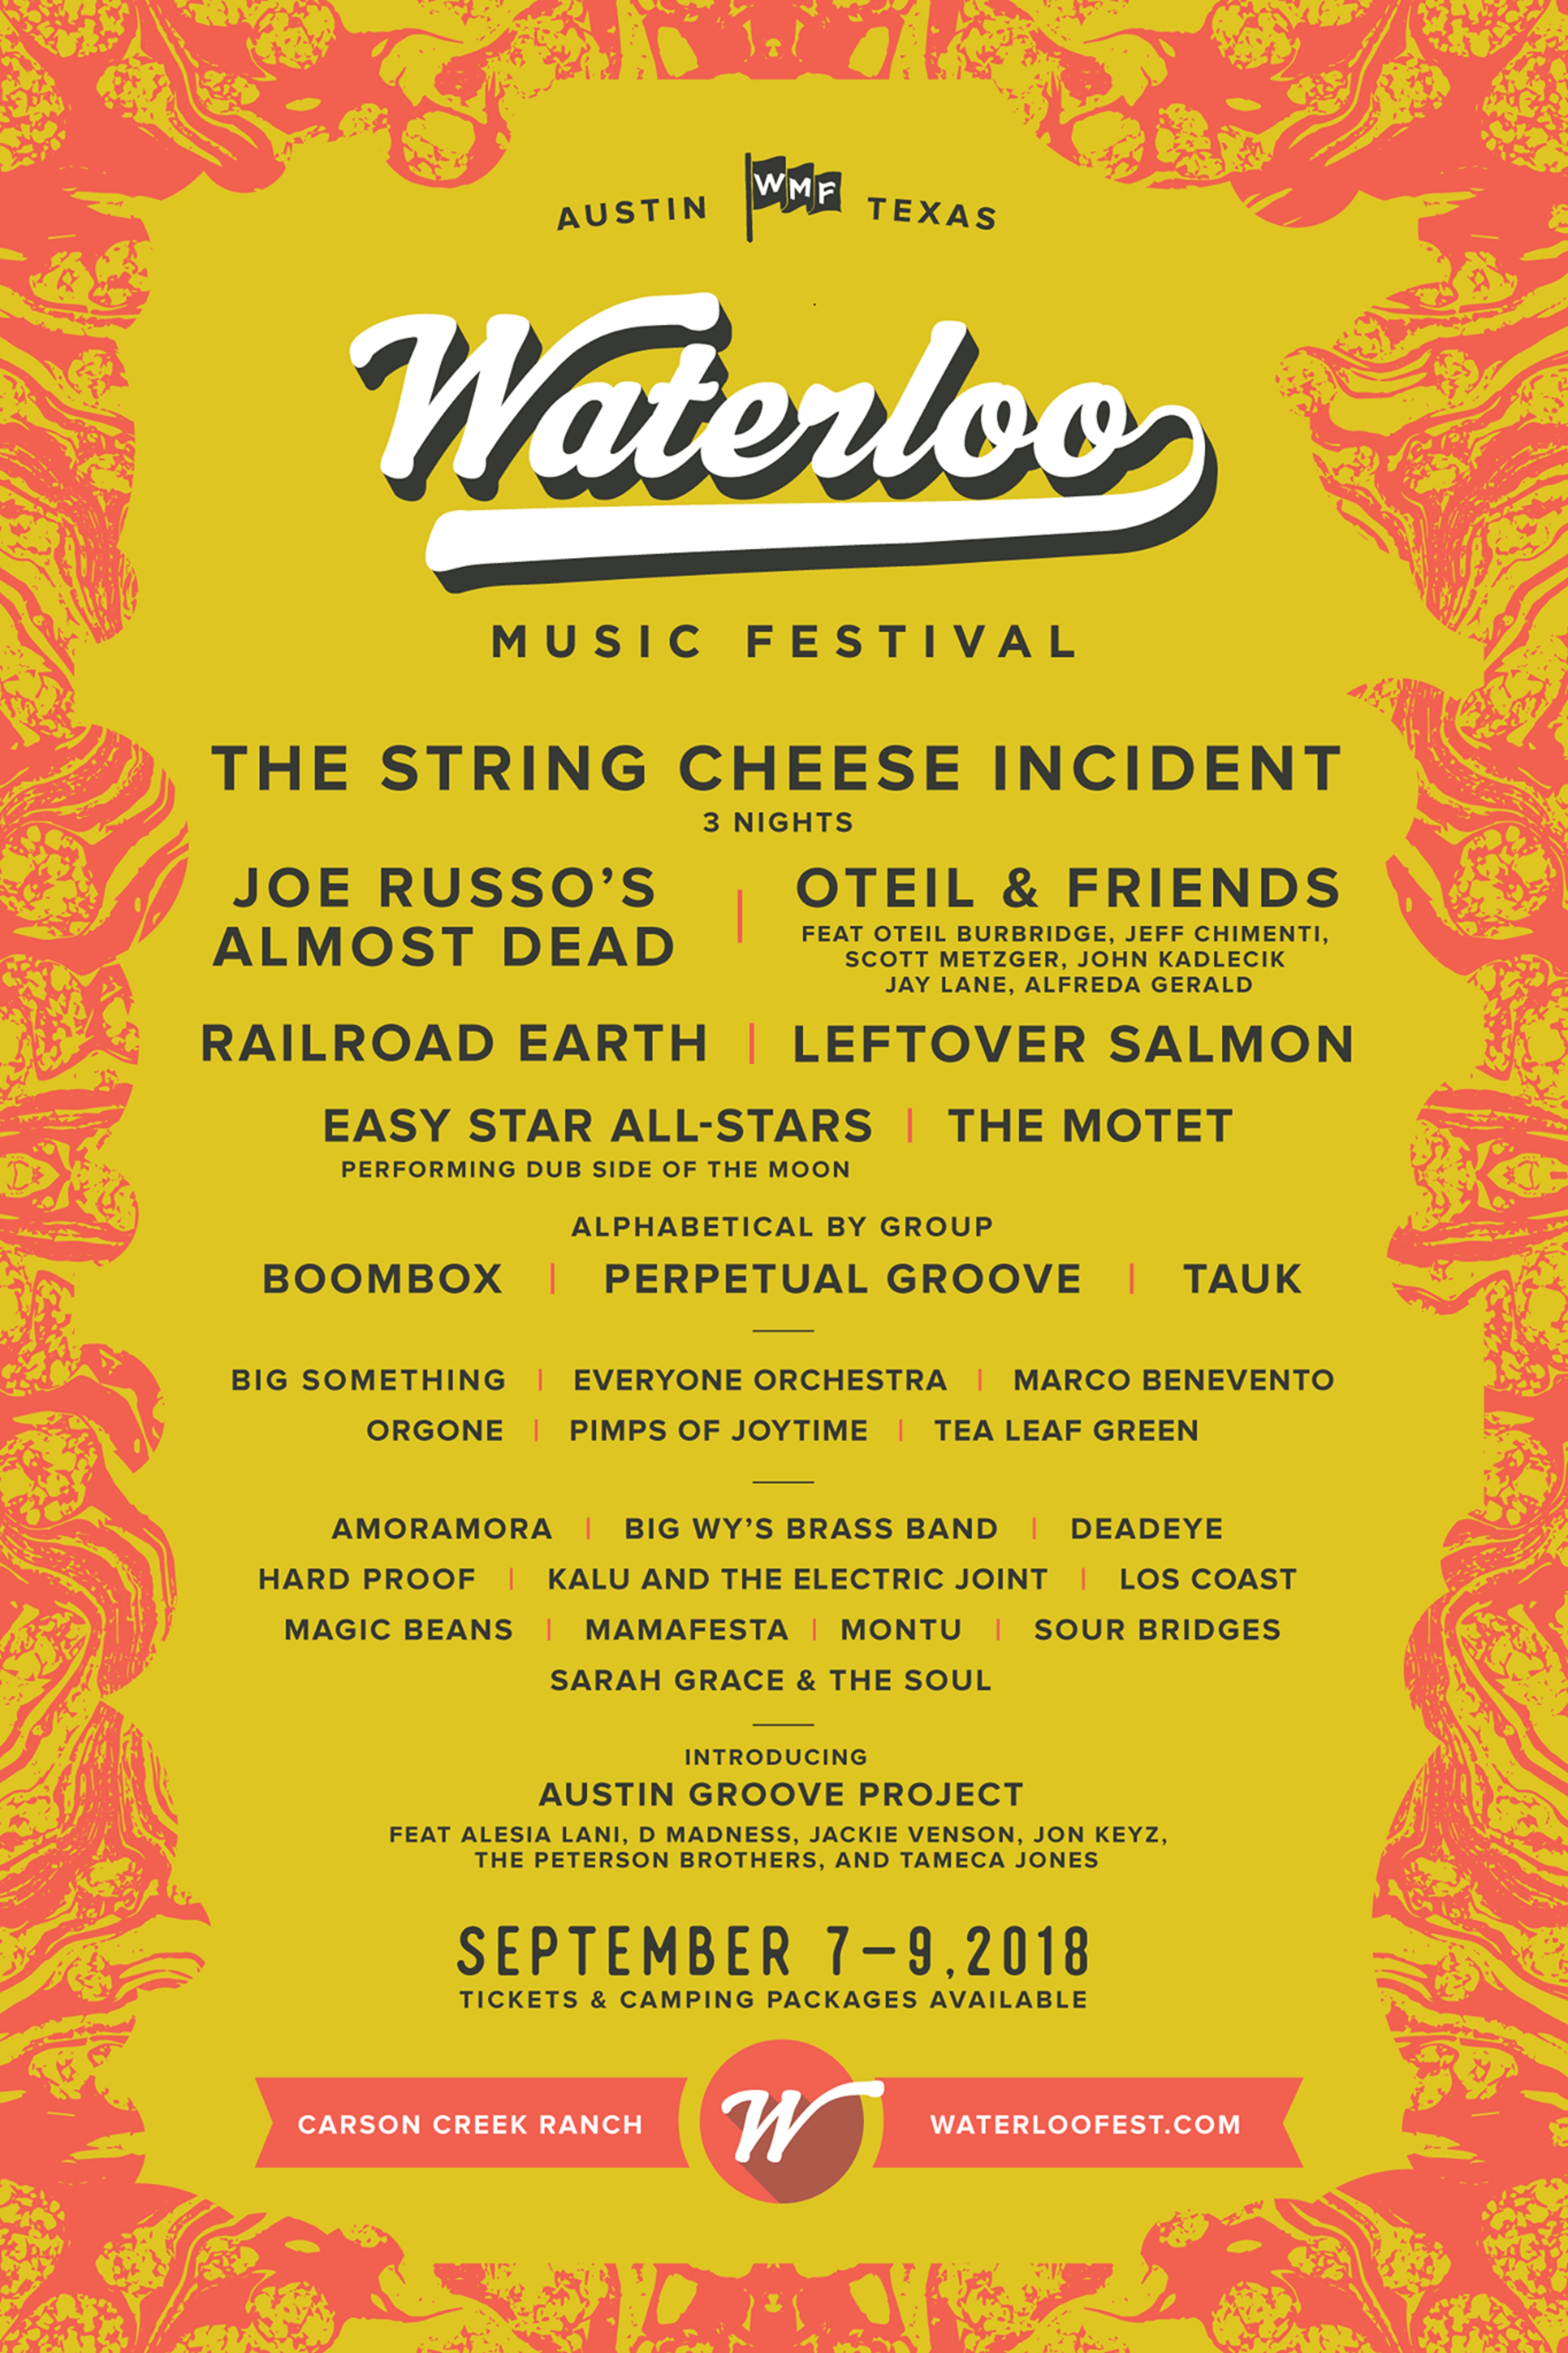 Waterloo Festival Comes to Austin This Weekend!